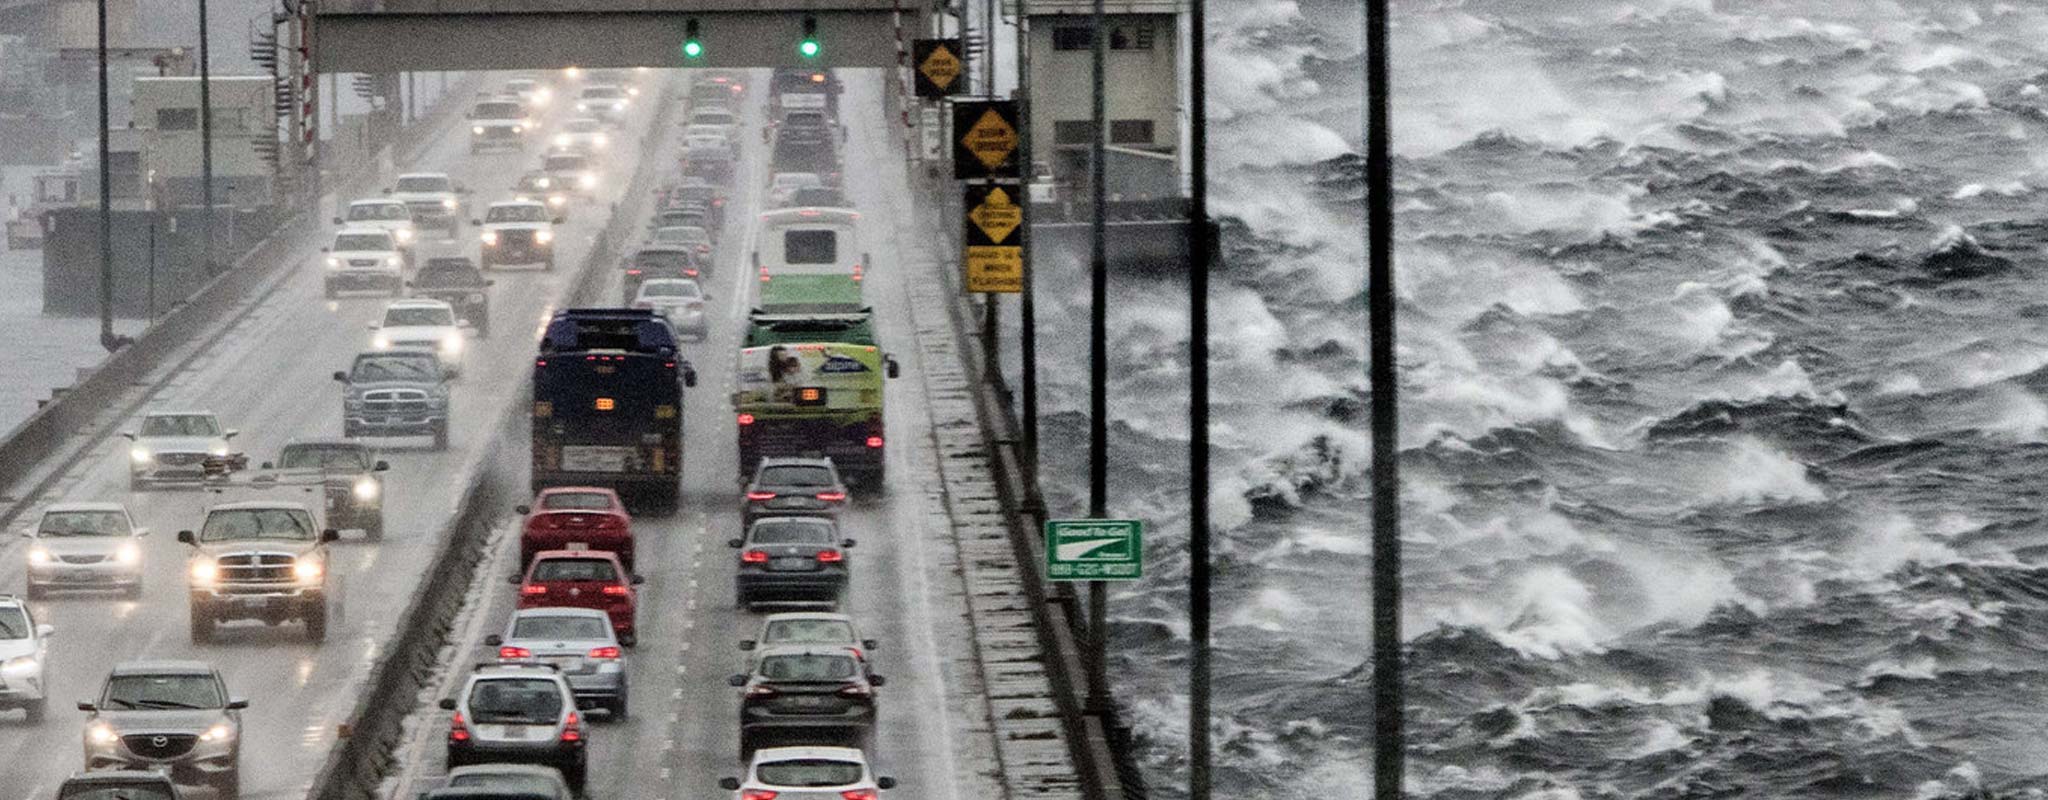 Cars driving over bridge in high winds with white caps on the water.